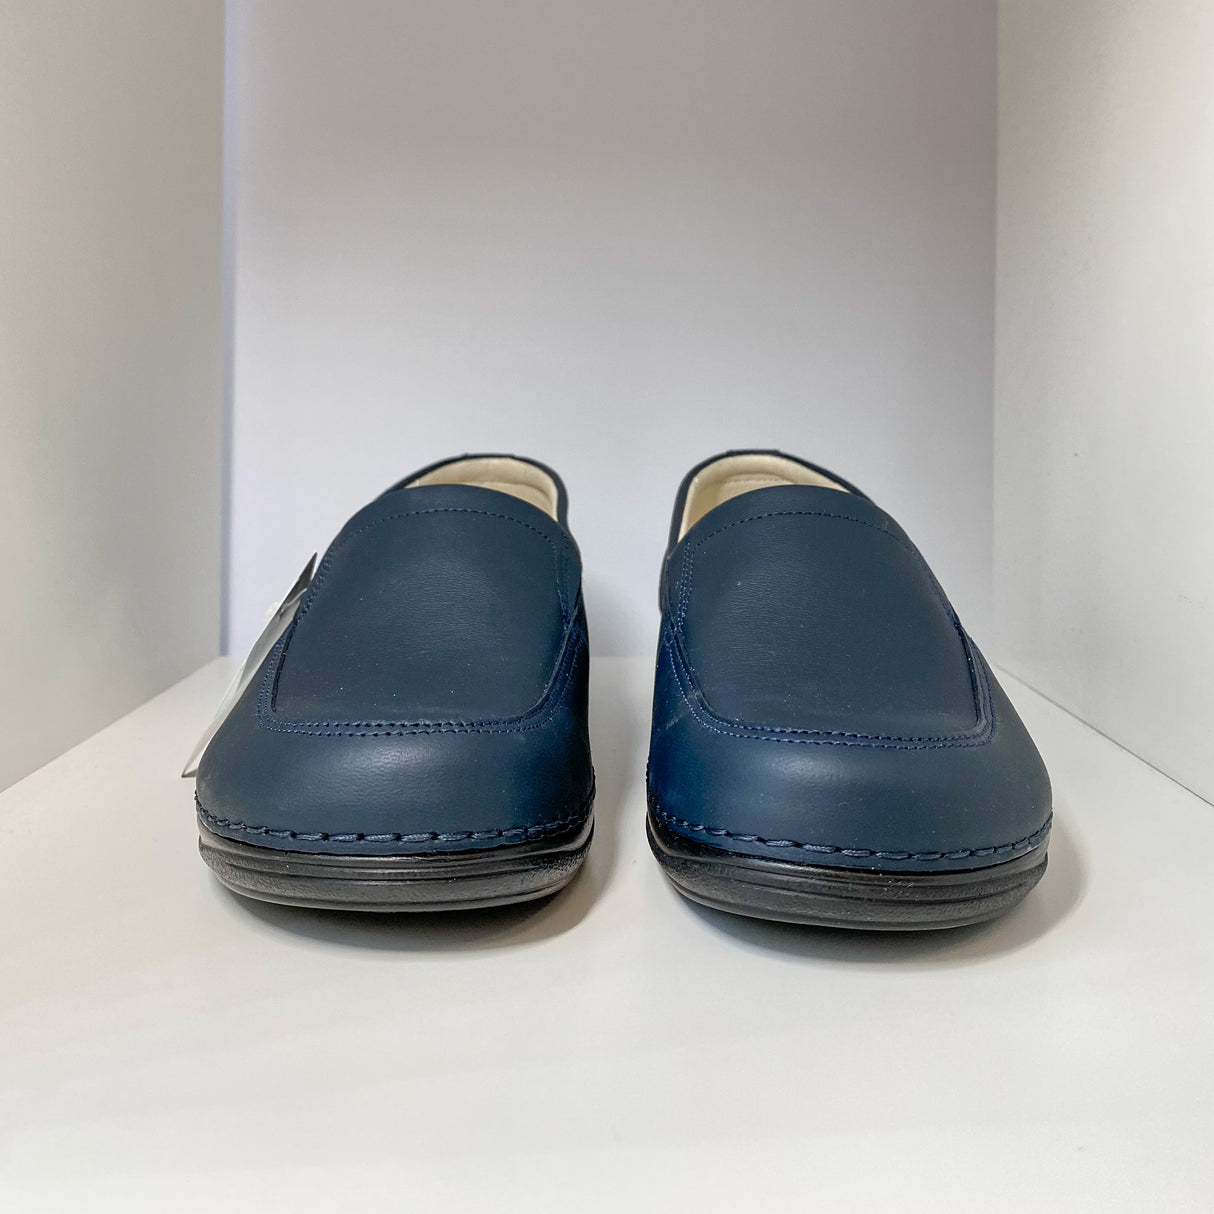 Comfort shoes for work | DARK BLUE | Rome